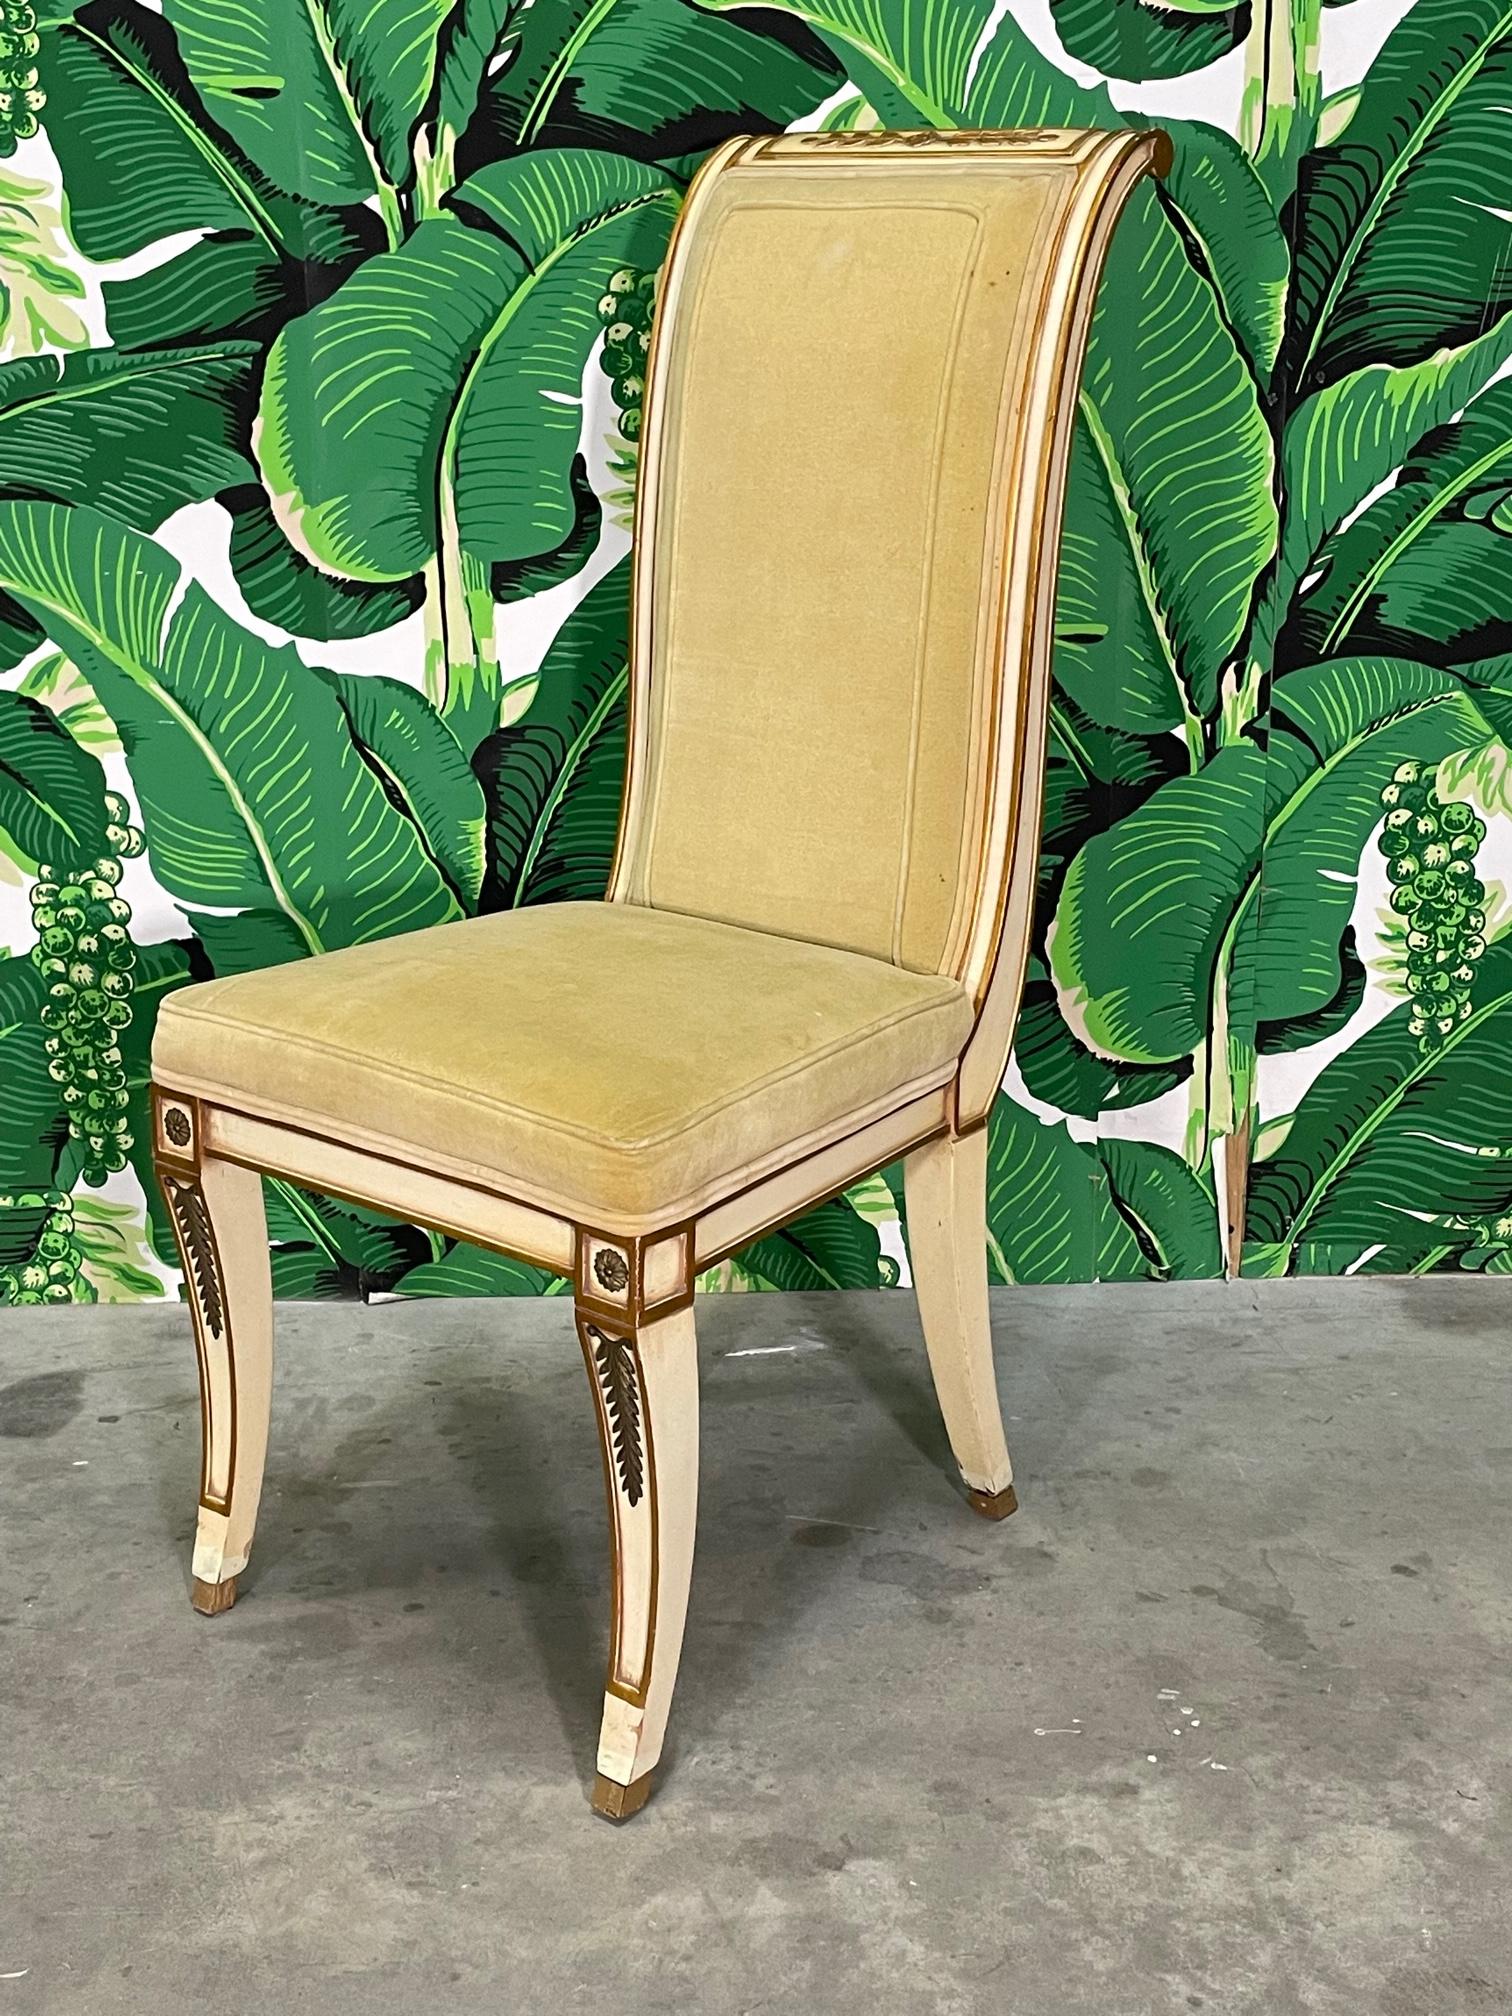 Set of 6 neoclassical style dining chairs by Karges Furniture feature gilded detailing, saber legs, and soft velvet upholstery. Upholstered backs as well. Very comfortable. Good vintage condition with imperfections consistent with age, see photos